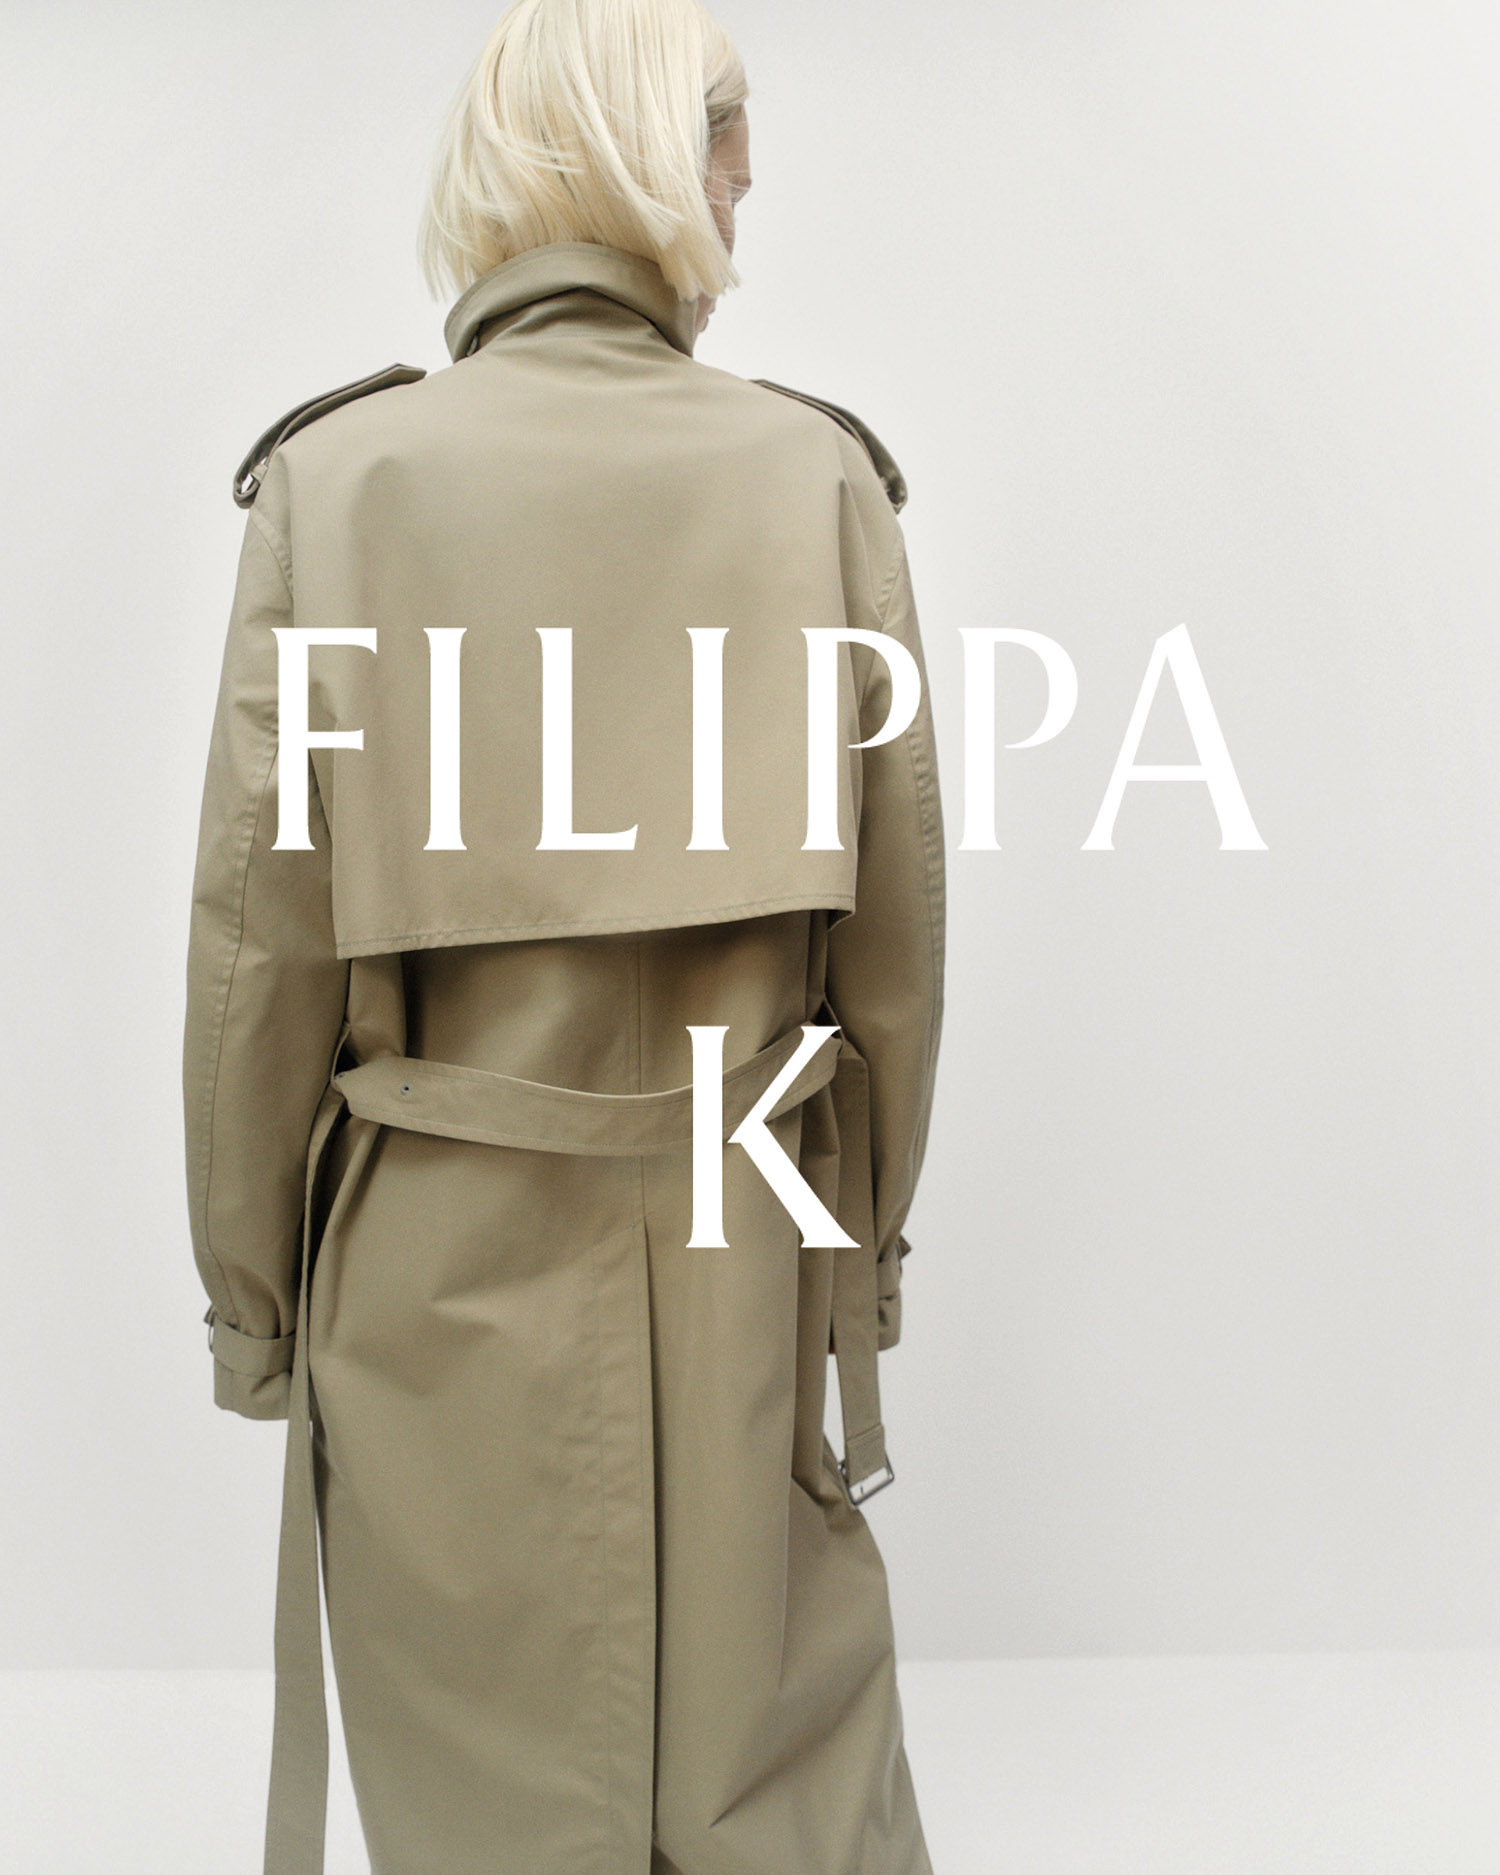 Filippa K SS24 campaign featuring Luisa Vagedas. Photography by Frida-My, styling by Isabelle Thiry.